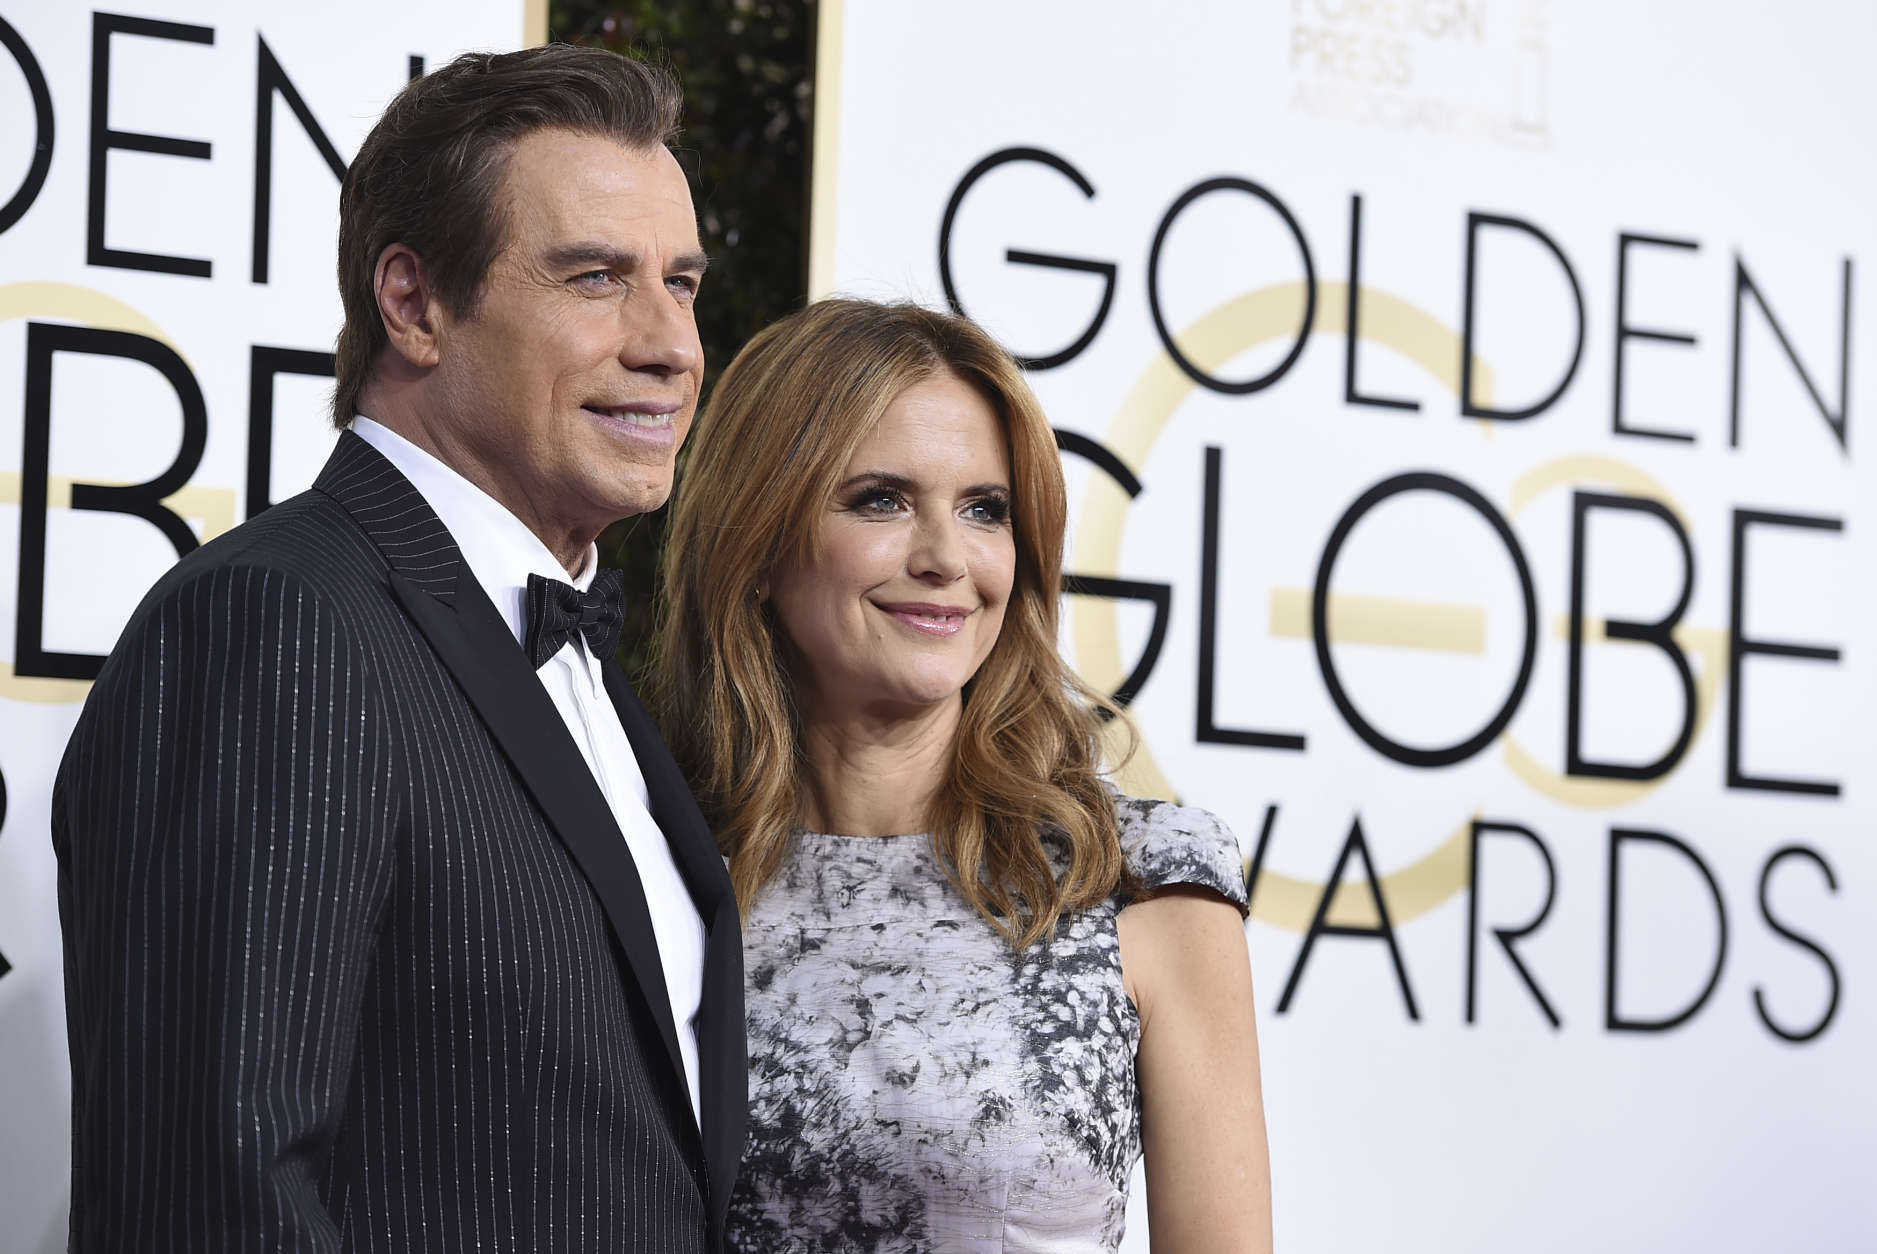 John Travolta, left, and Kelly Preston arrive at the 74th annual Golden Globe Awards at the Beverly Hilton Hotel on Sunday, Jan. 8, 2017, in Beverly Hills, Calif. (Photo by Jordan Strauss/Invision/AP)